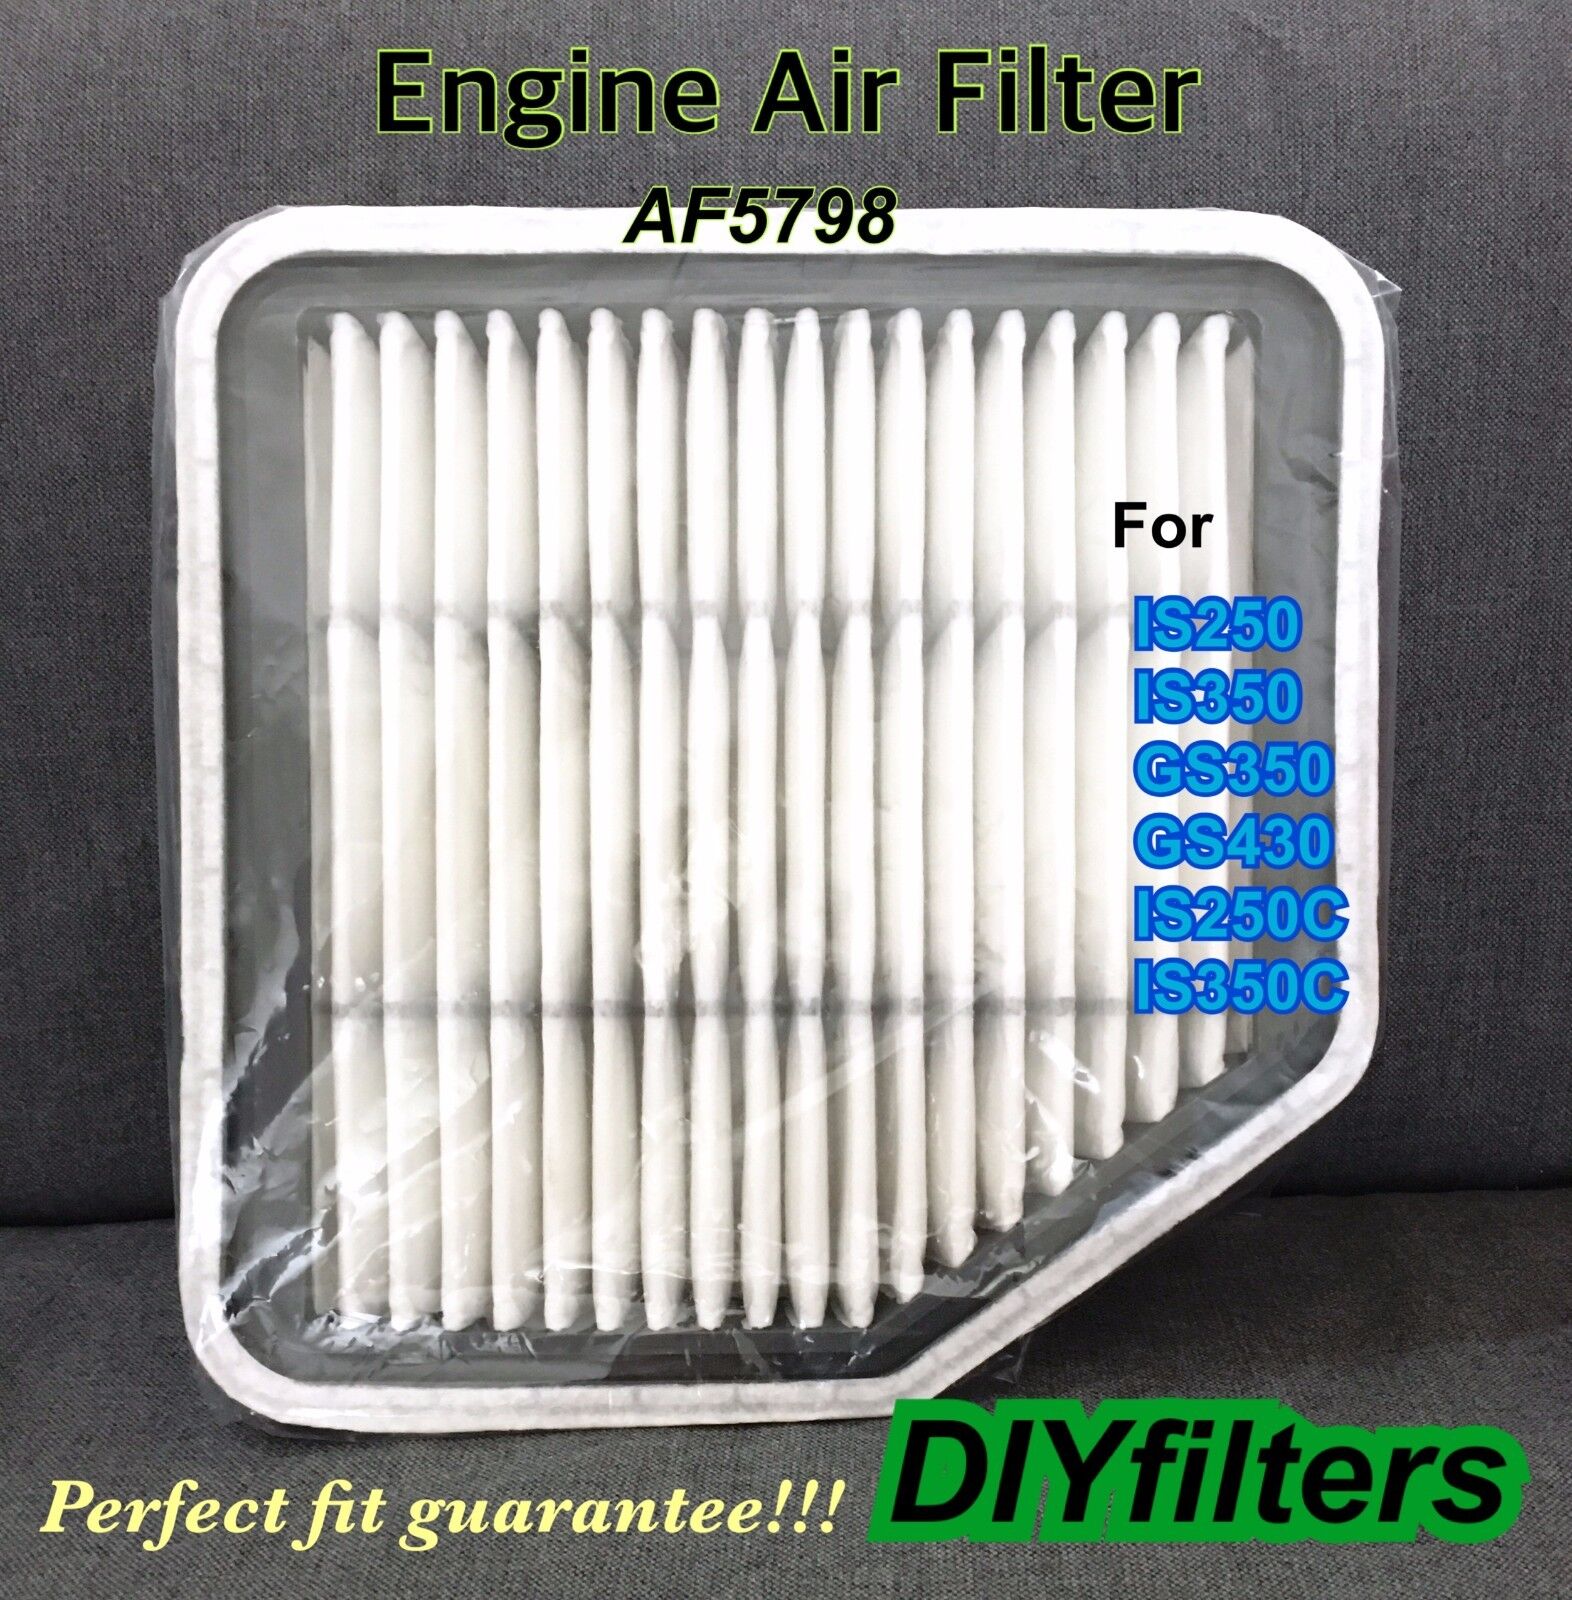 Engine Air Filter For Lexus IS250 IS350 06-13 GS350 GS430 IS250C IS350C AF5798 